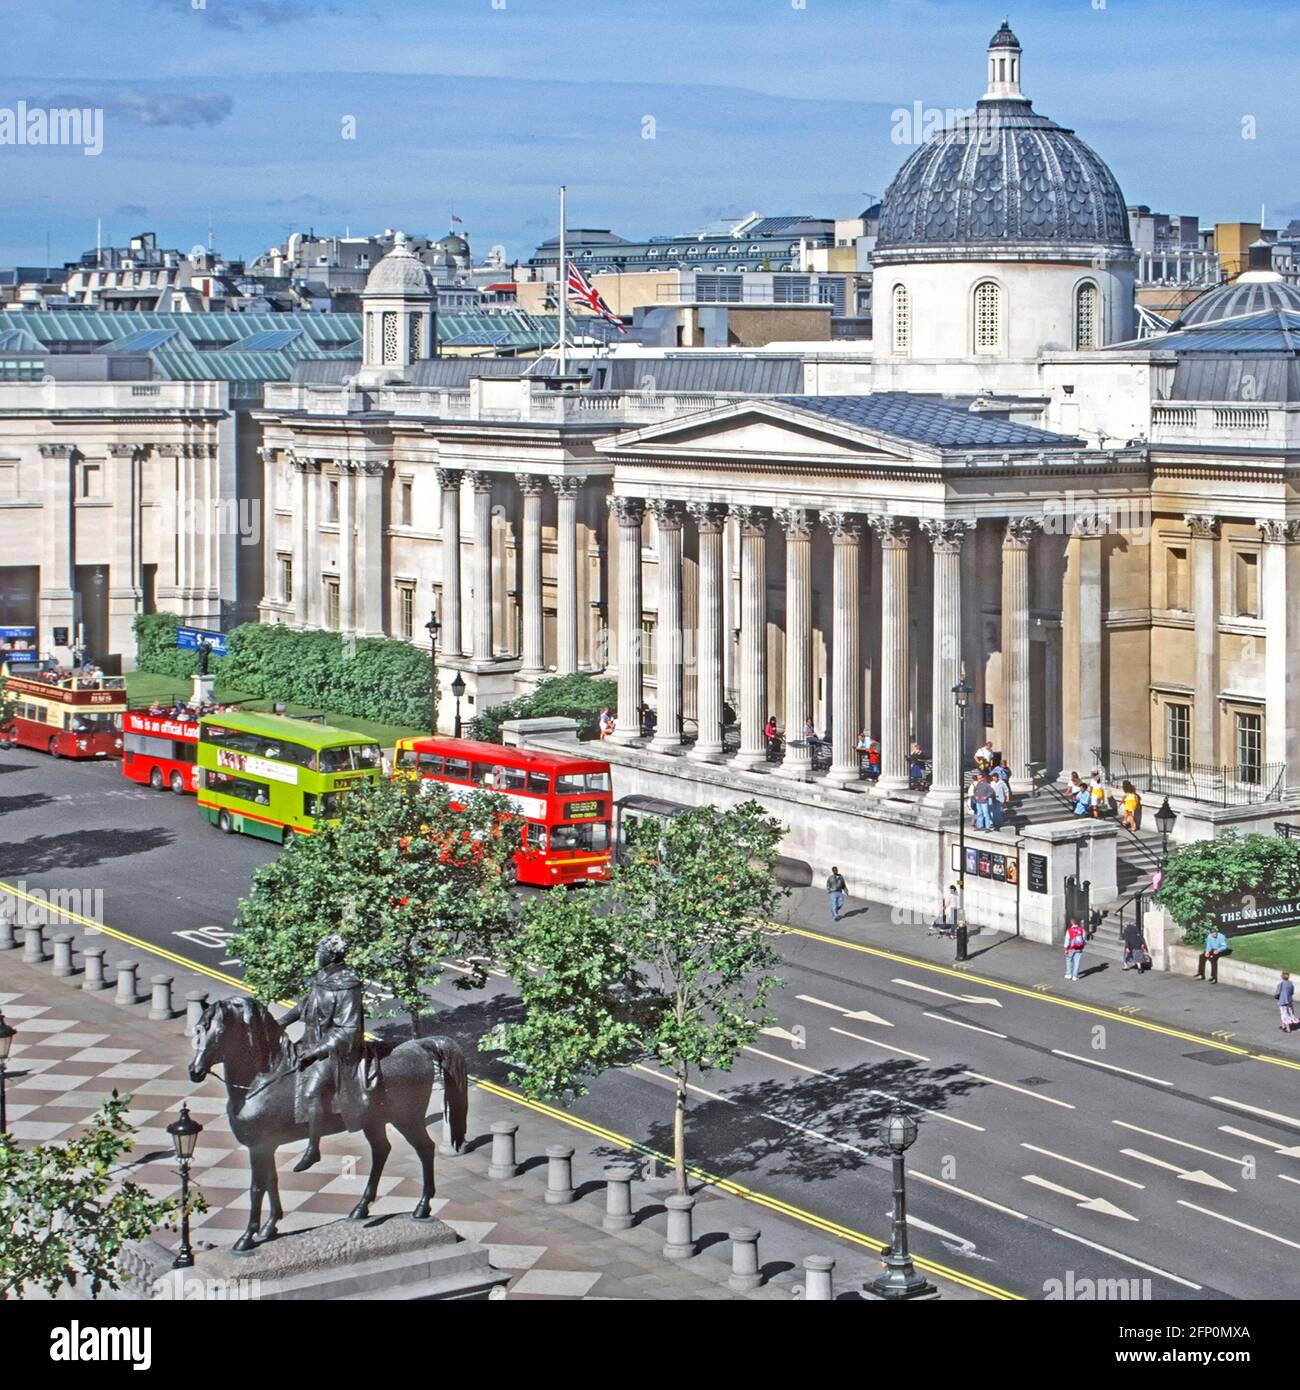 Aerial 1997 historical view double decker buses at bus stop for National Gallery before this part of Trafalgar Square London was pedestrianized 90s UK Stock Photo